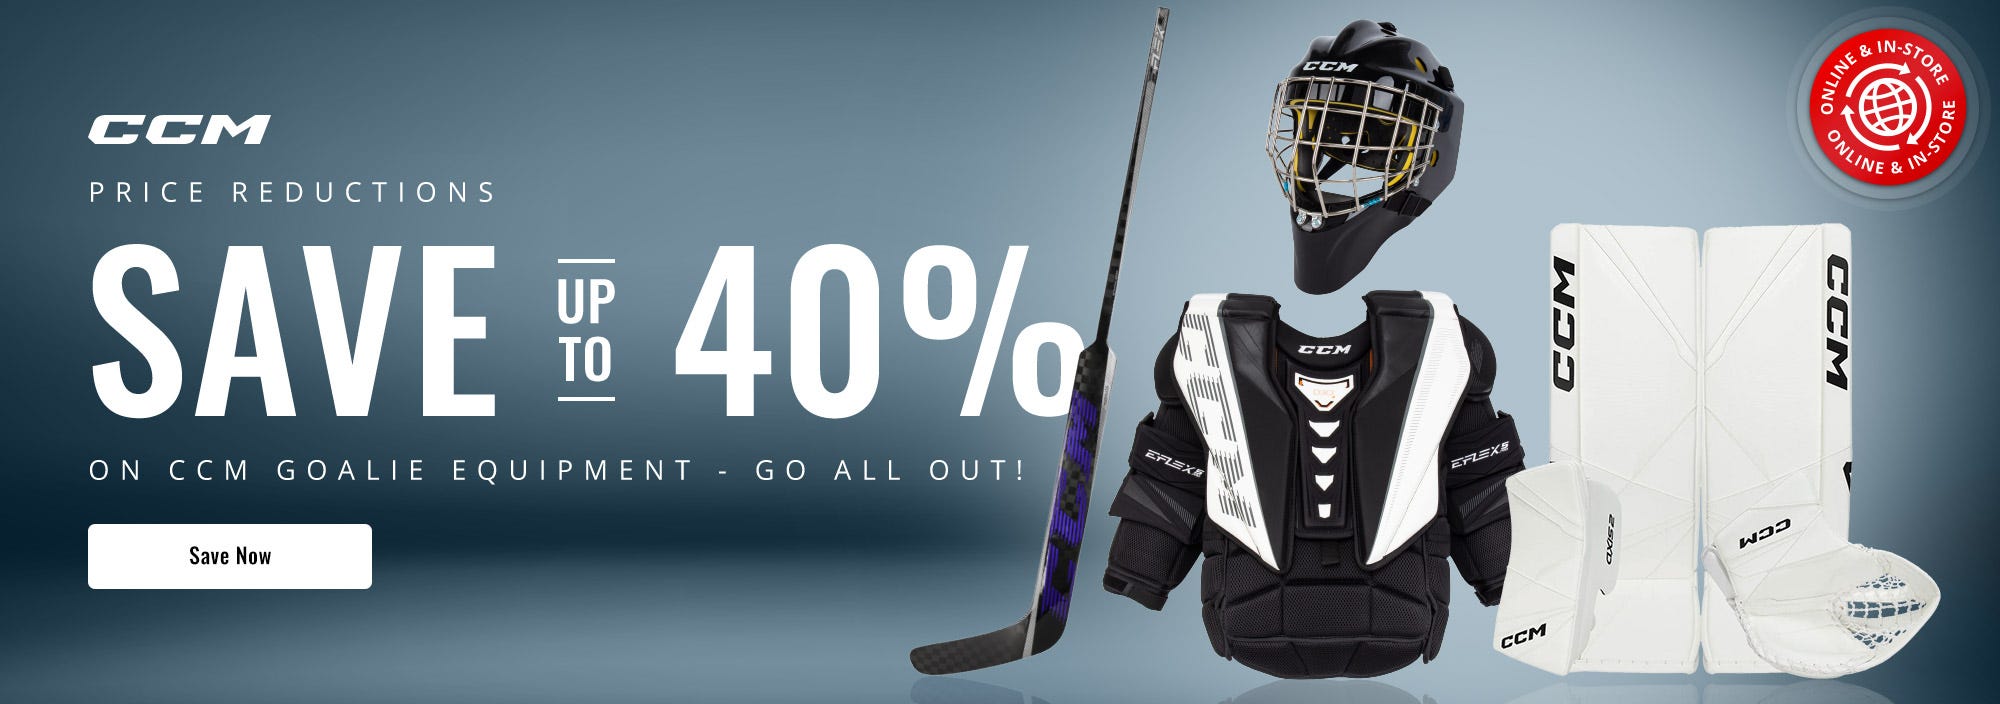 CCM Price Reductions | Save up to 40% on CCM Axis 2 & Extreme Flex 5